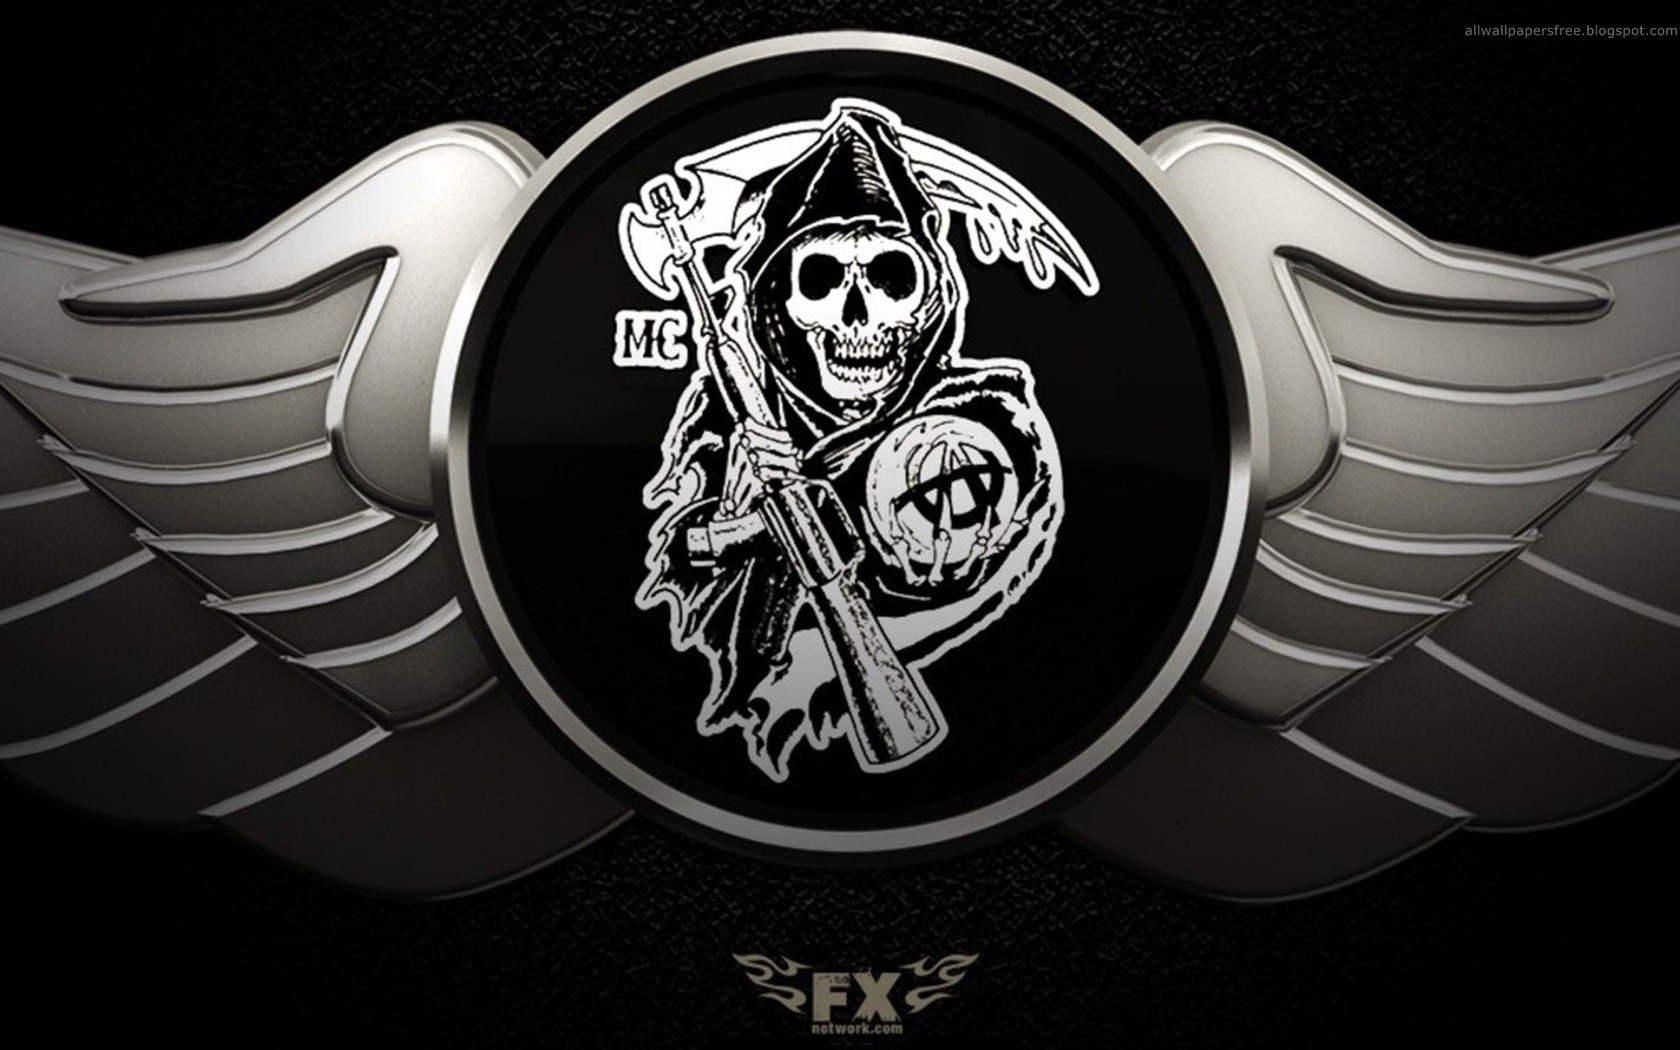 sons of anarchy, tv show iphone wallpaper